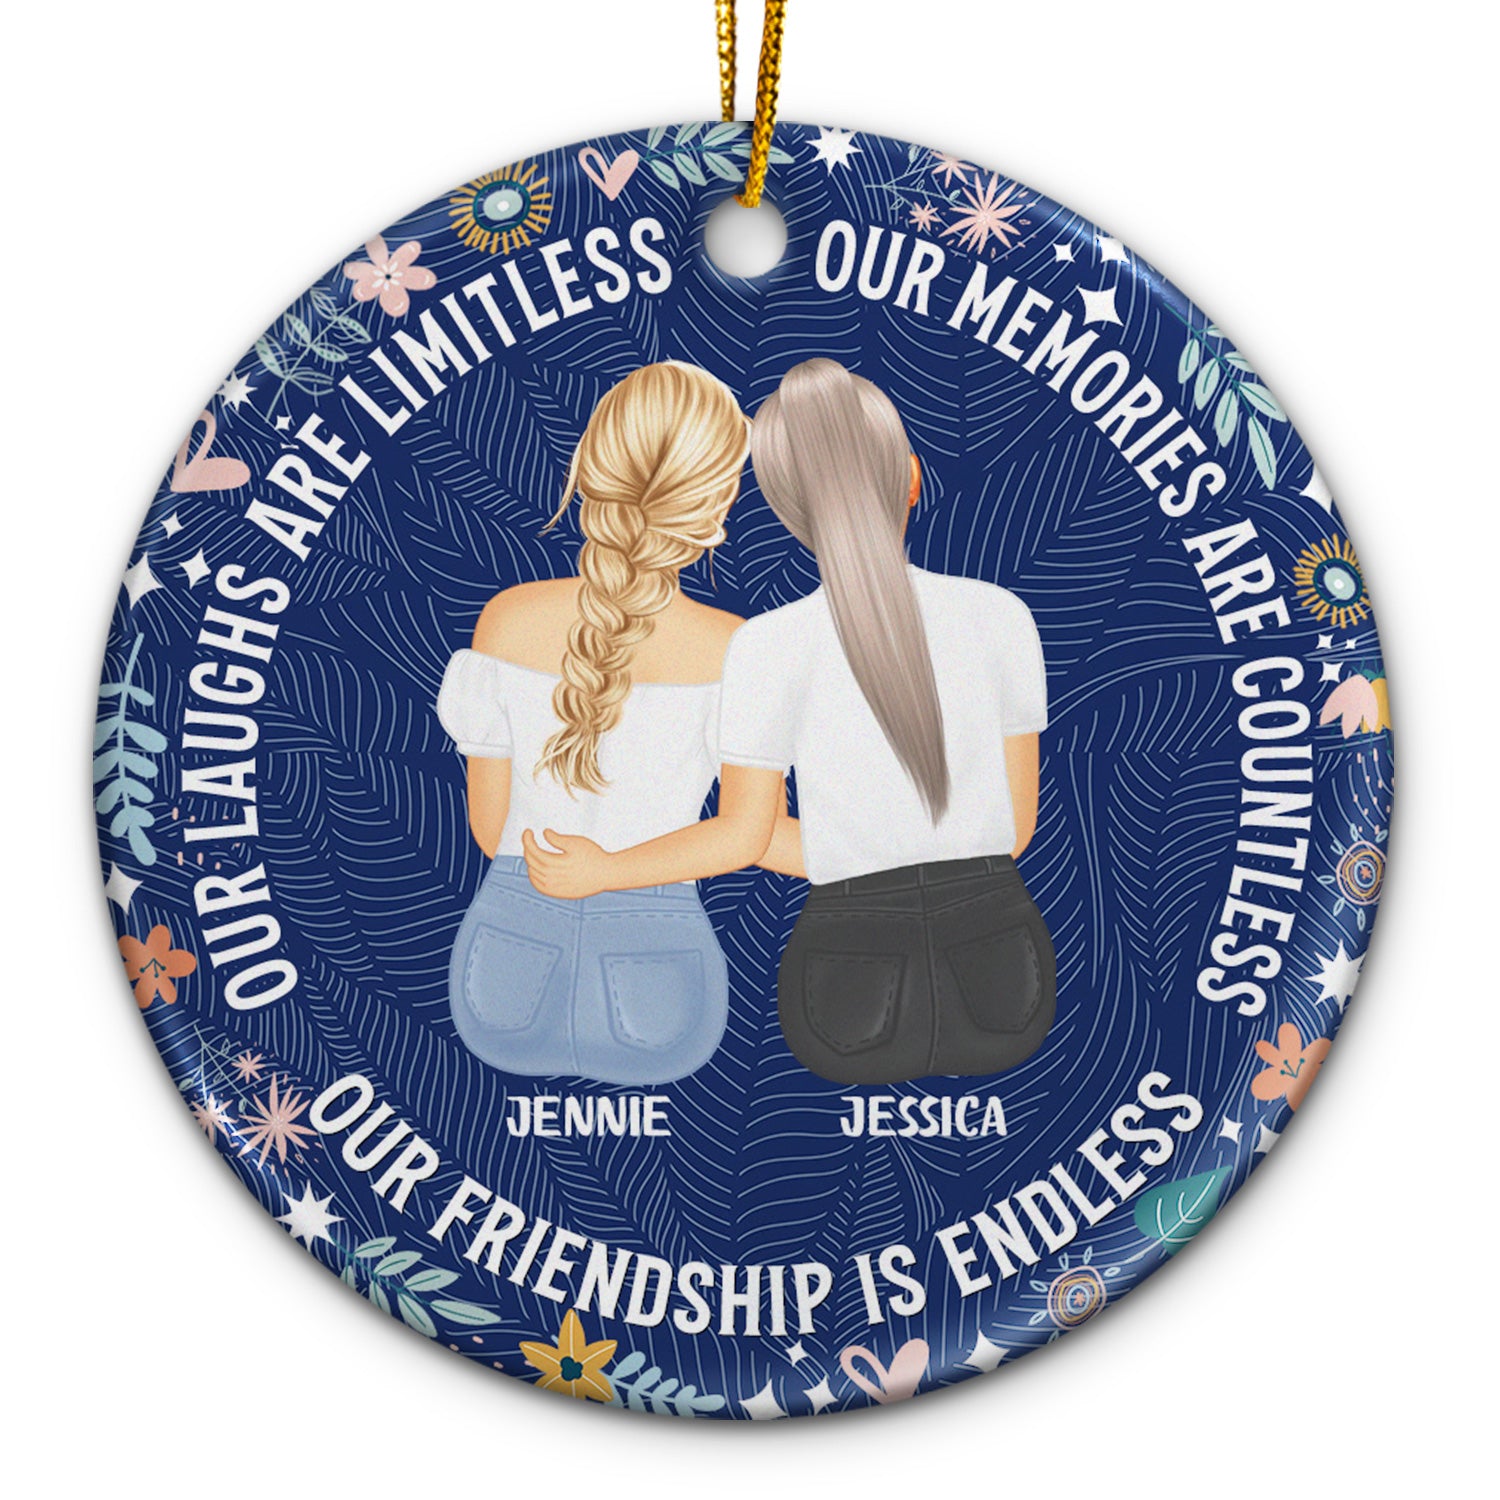 Our Memories Are Countless, Our Friendship Is Endless - Christmas Gifts For Besties, Soul Sisters - Personalized Circle Ceramic Ornament